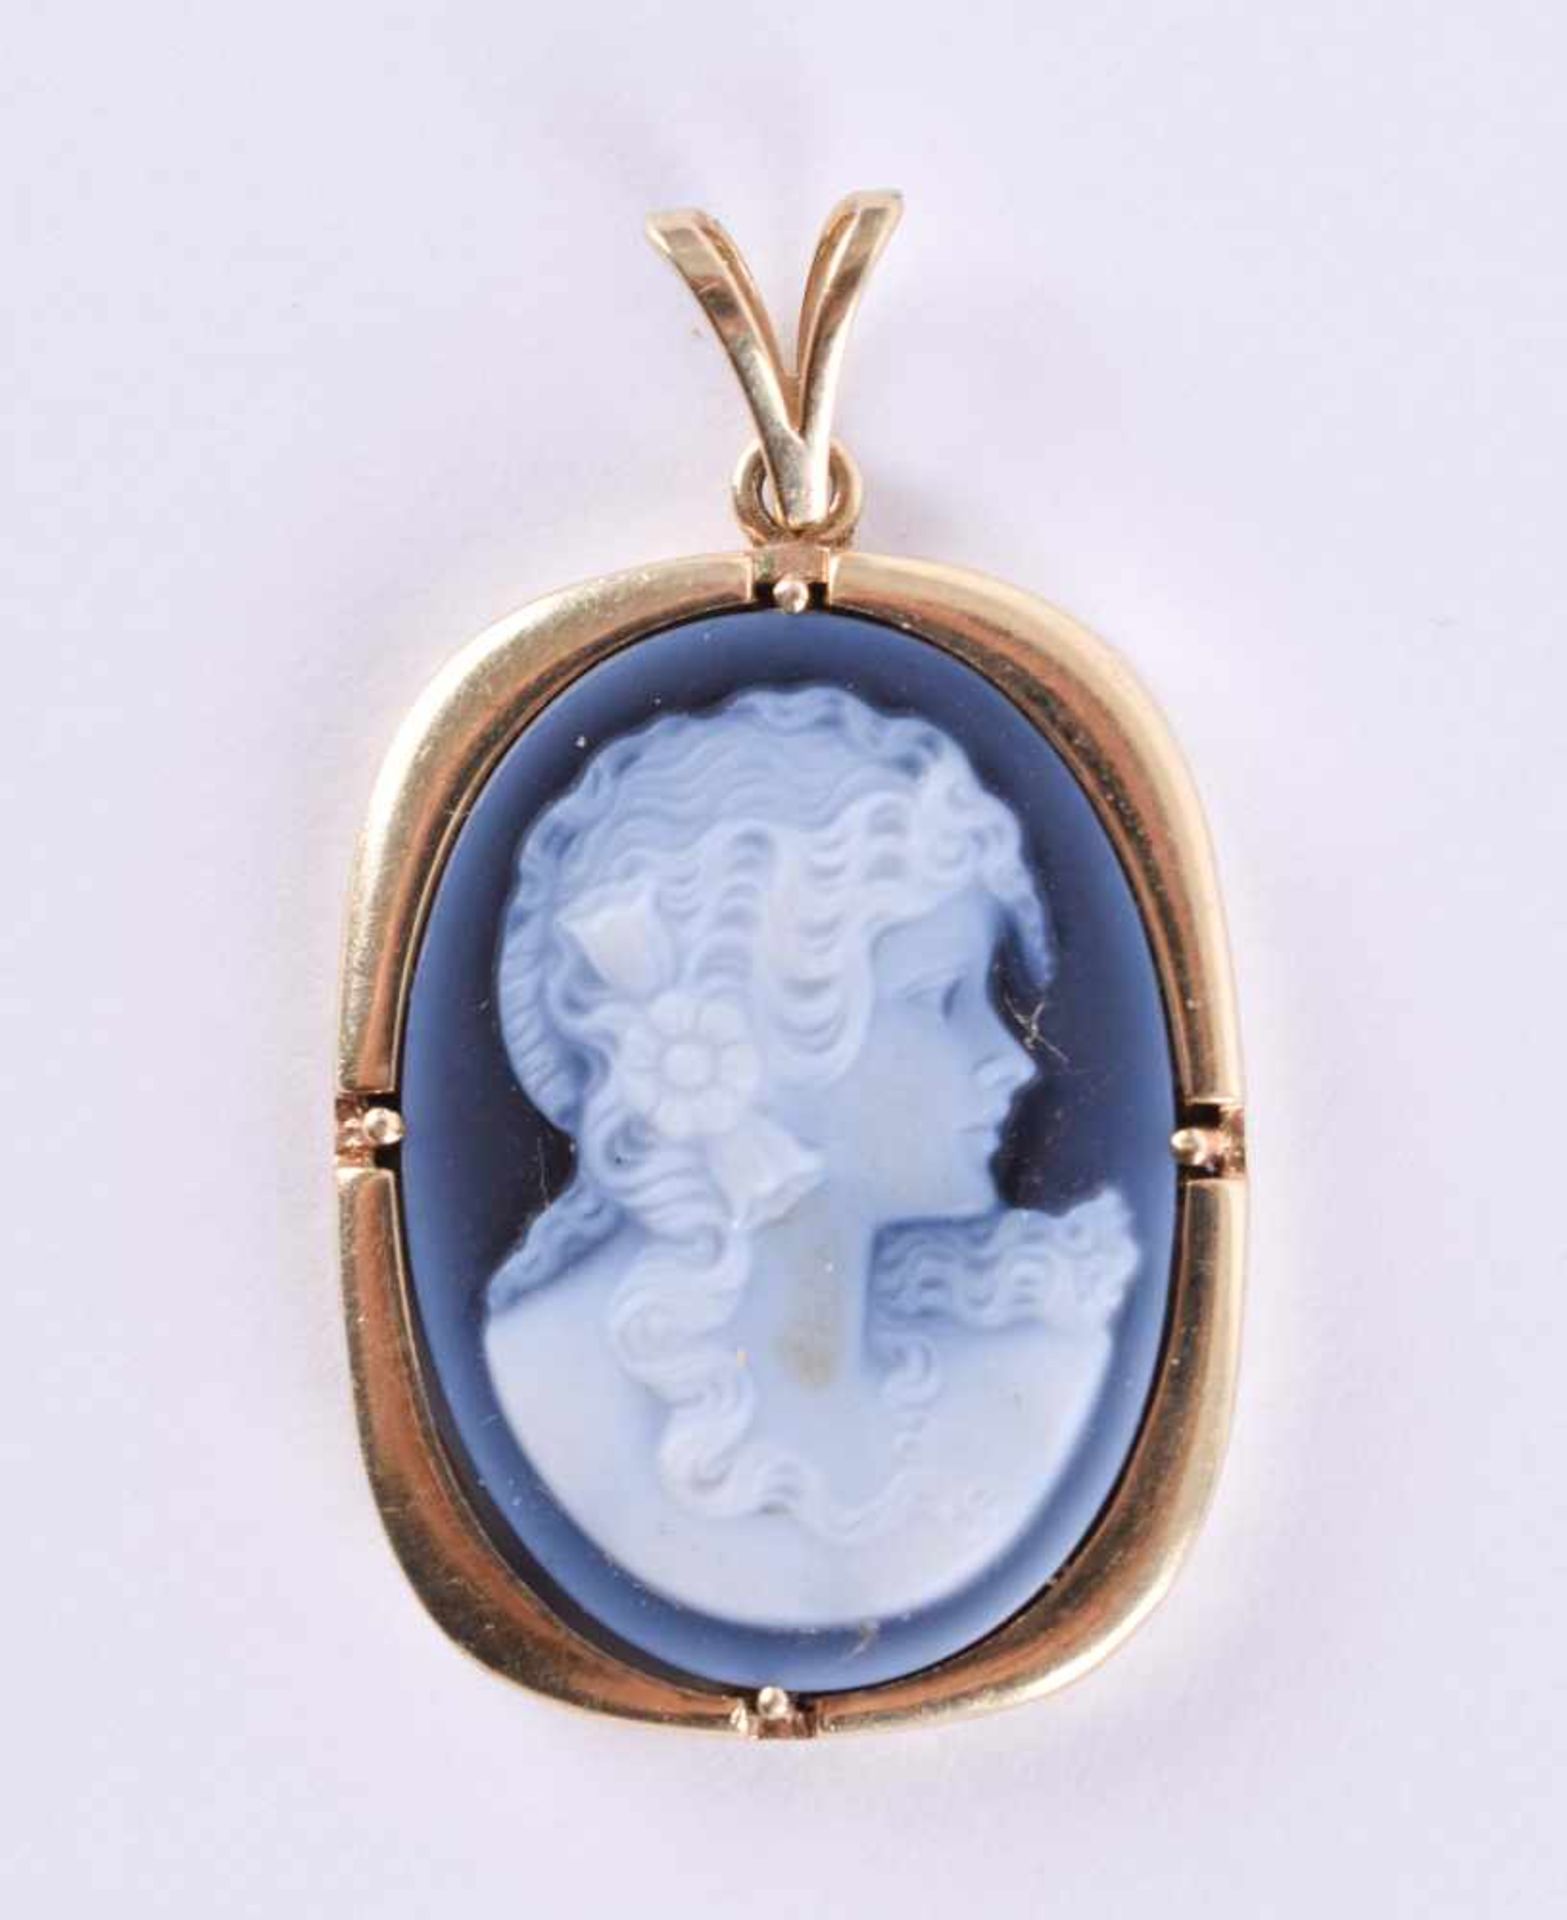 Pendant with blue gemyellow gold 585/000, 28 mm x 20 mm, total weight approx. 7 g.Anhänger mit